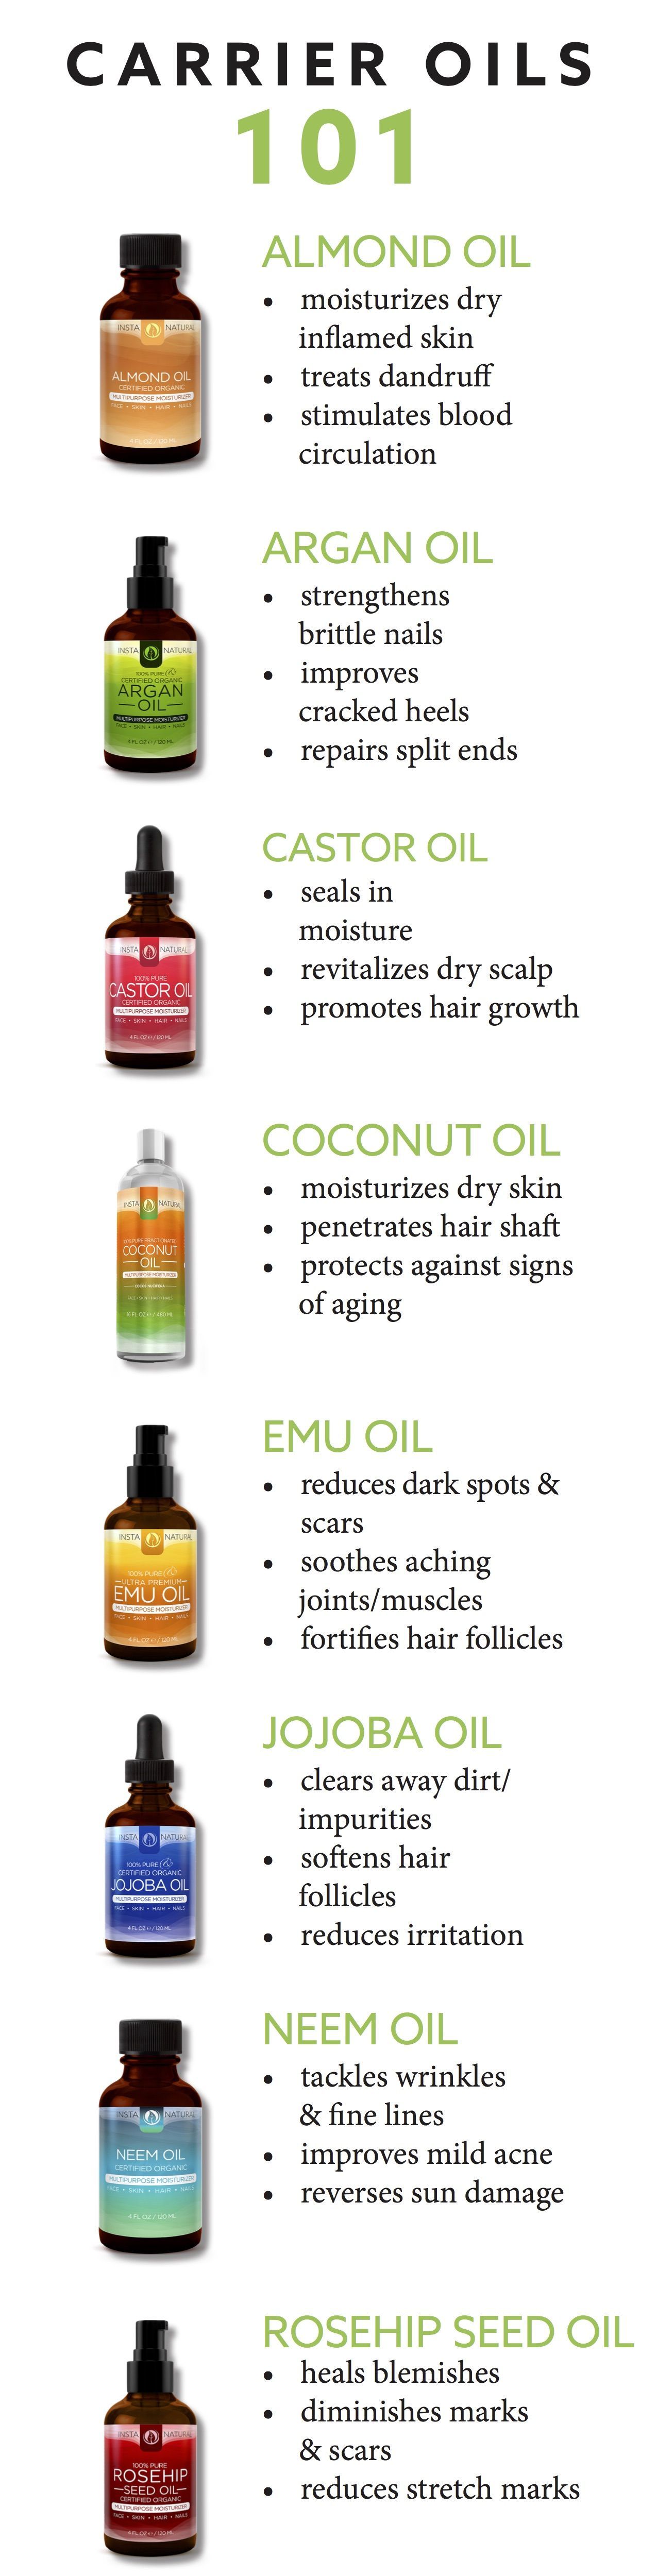 Discover all the amazing benefits of our carrier oils.